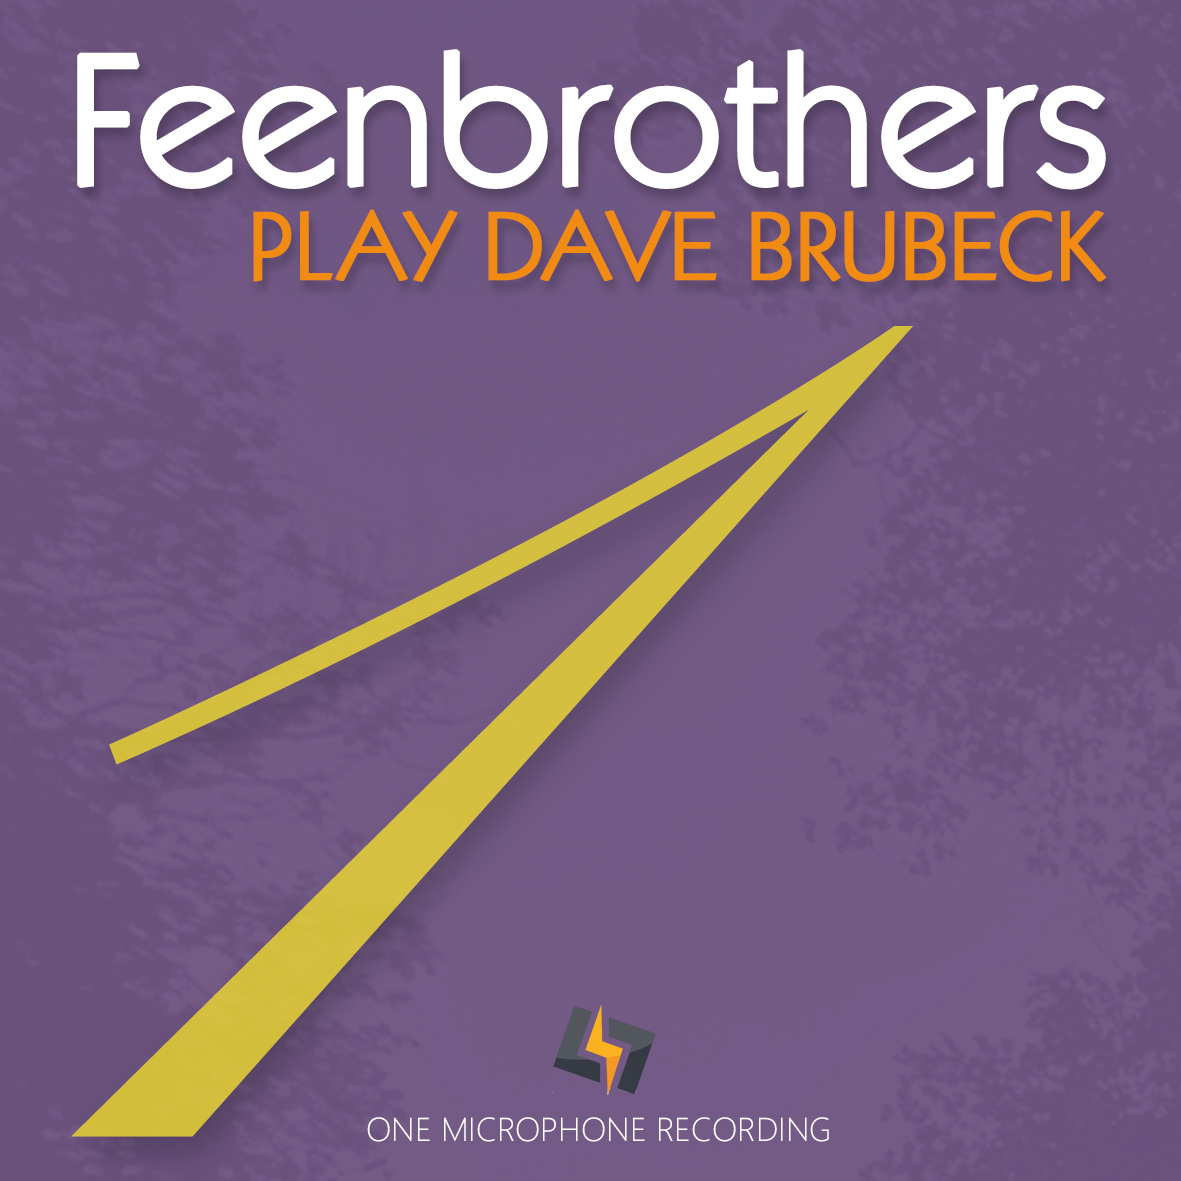 The Feenbrothers – Play Dave Brubeck (2019) SACD ISO + Hi-Res FLAC